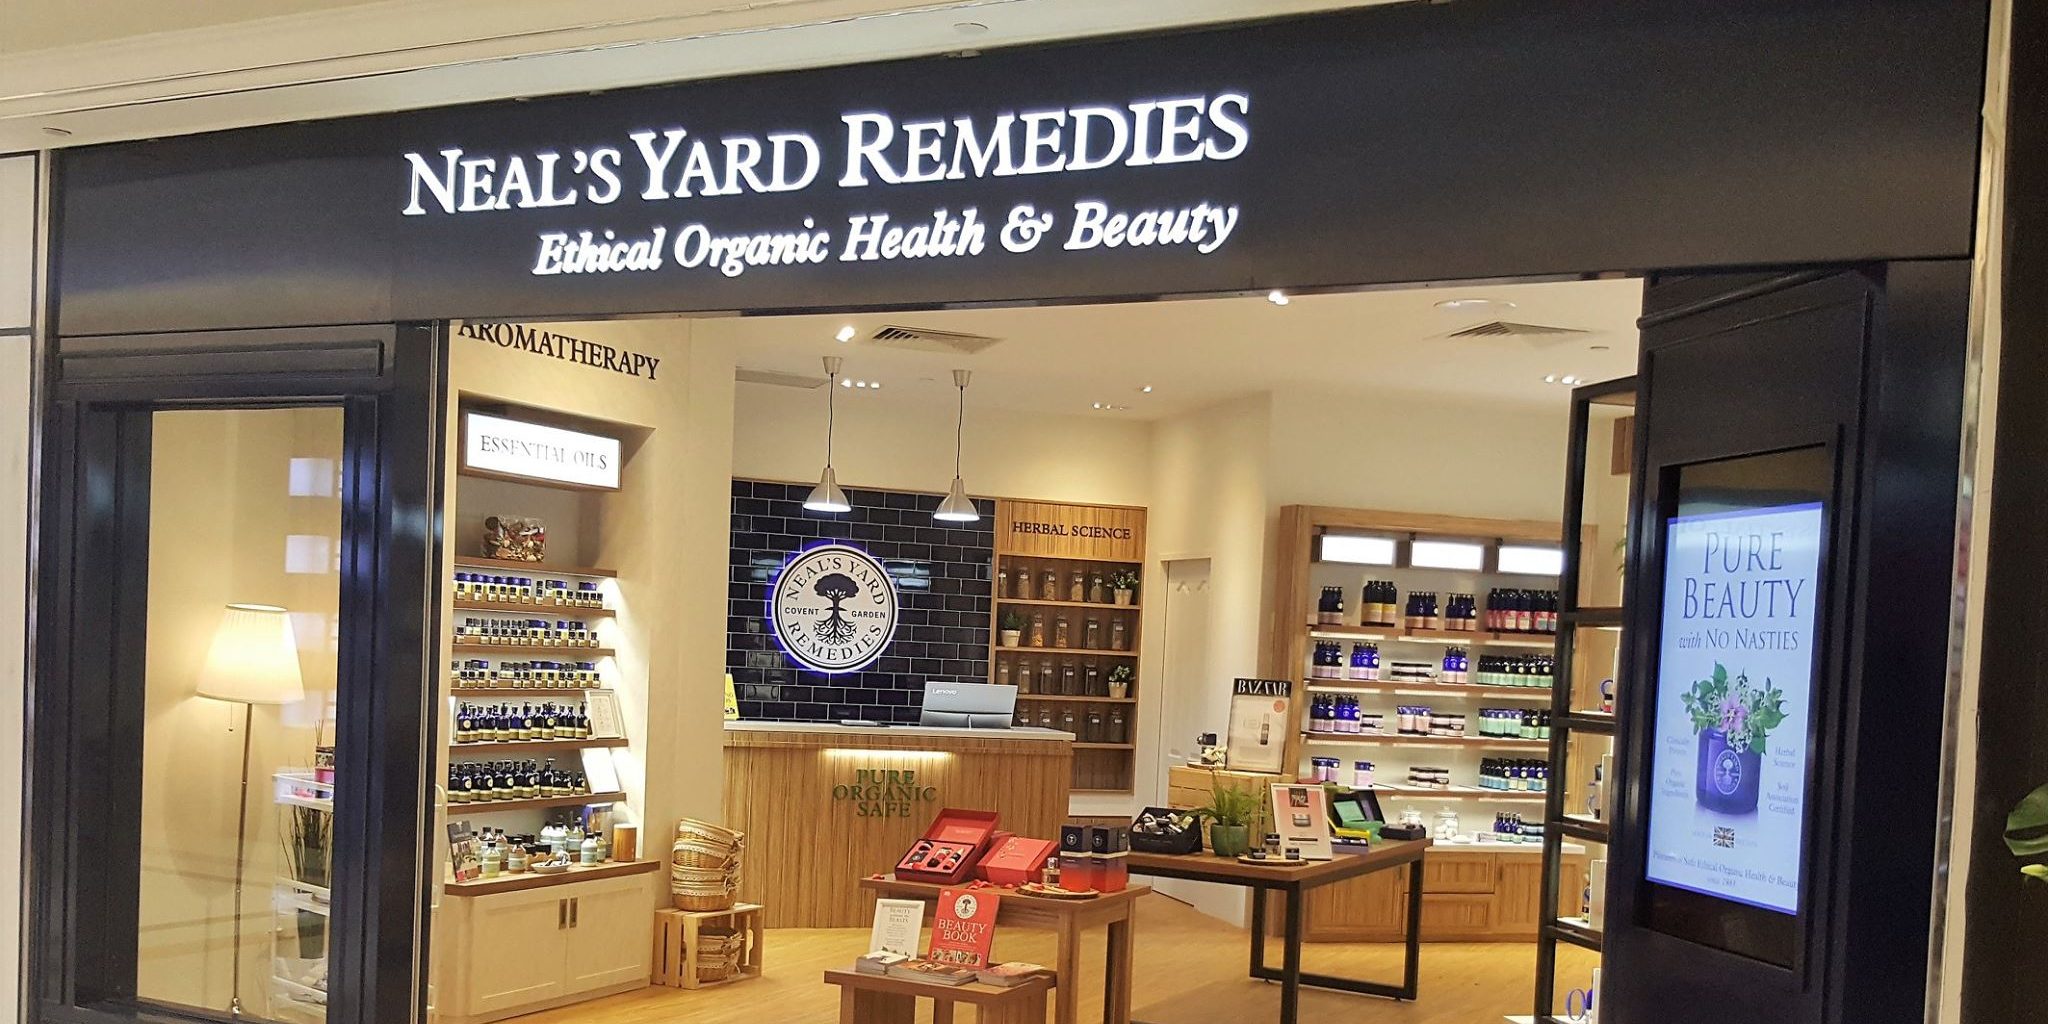 Neal’s Yard Remedies Singapore New Store Up to 30% Off Storewide Promotion 20-22 Jan 2017